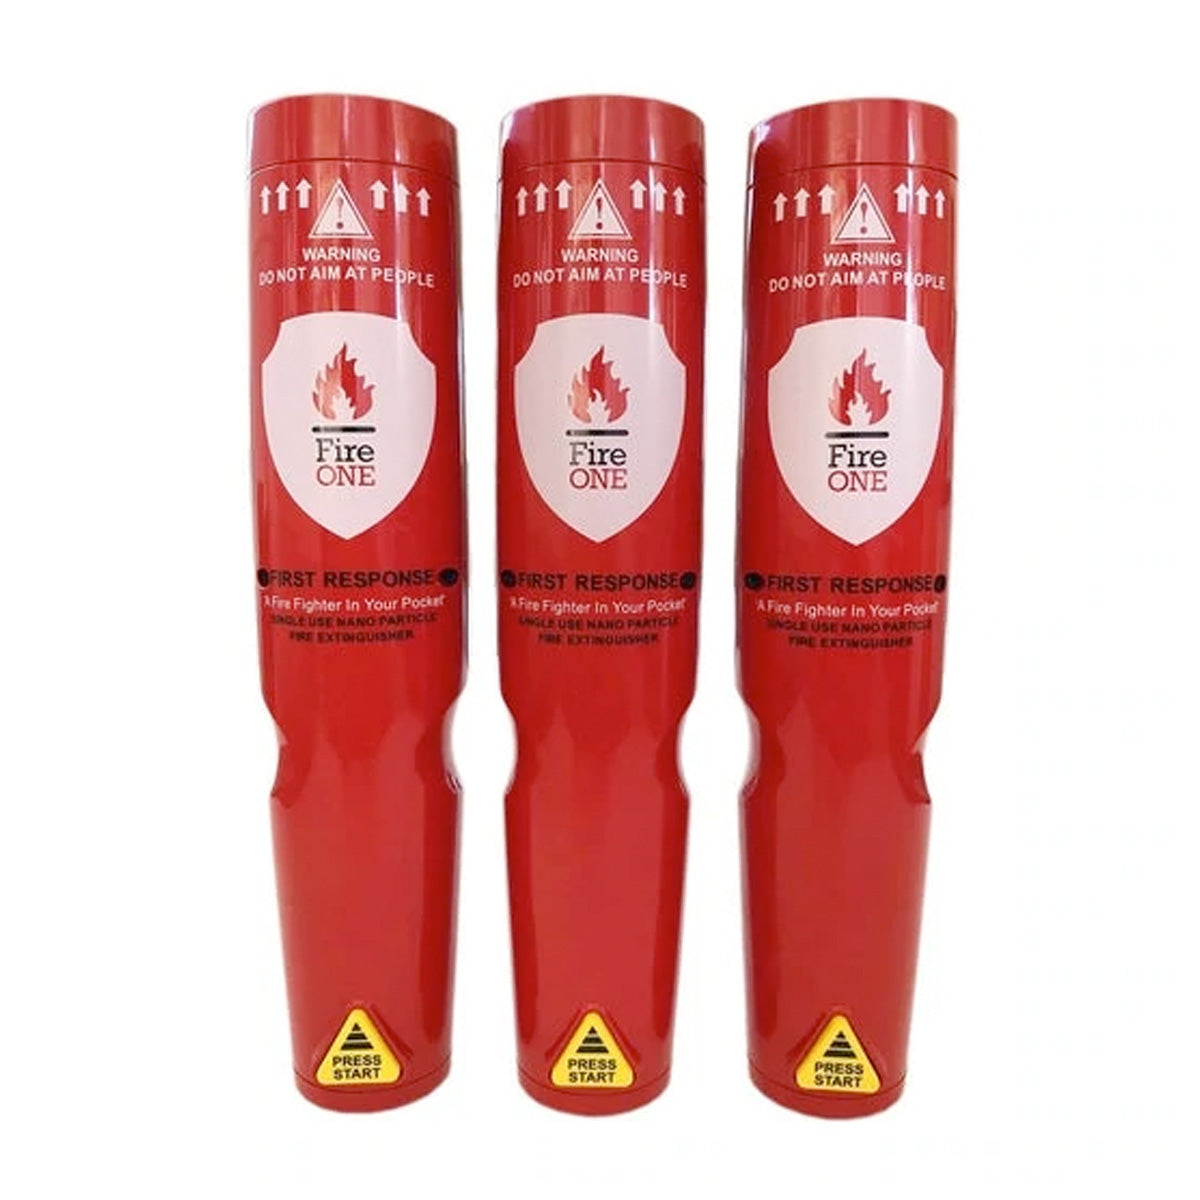 Fire One First Response Portable Fire Extinguisher Three Units (Save $12) Tactical Distributors Ltd New Zealand